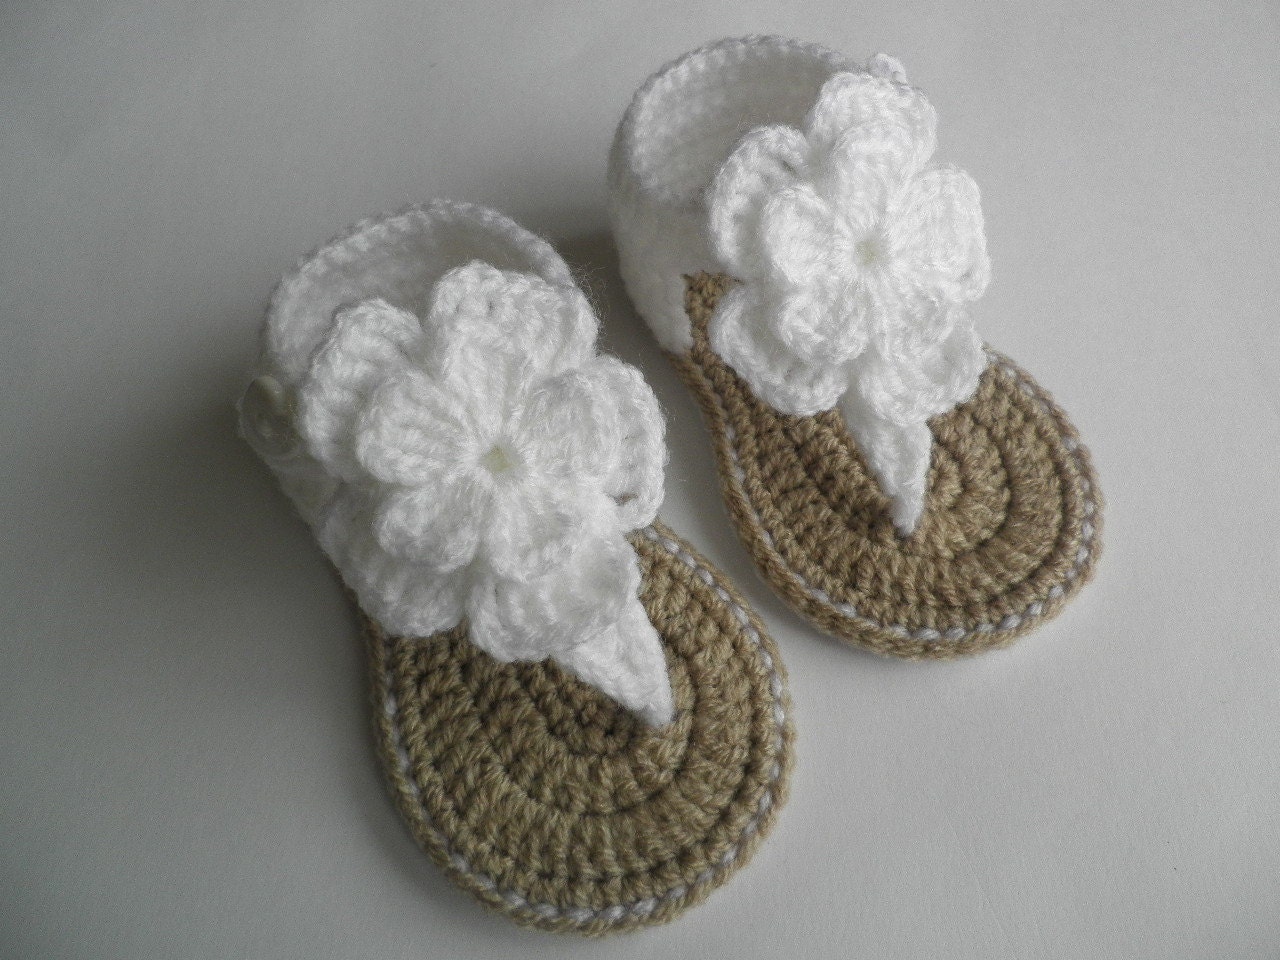 Crochet baby sandals, baby gladiator sandals, baby booties, baby shoes